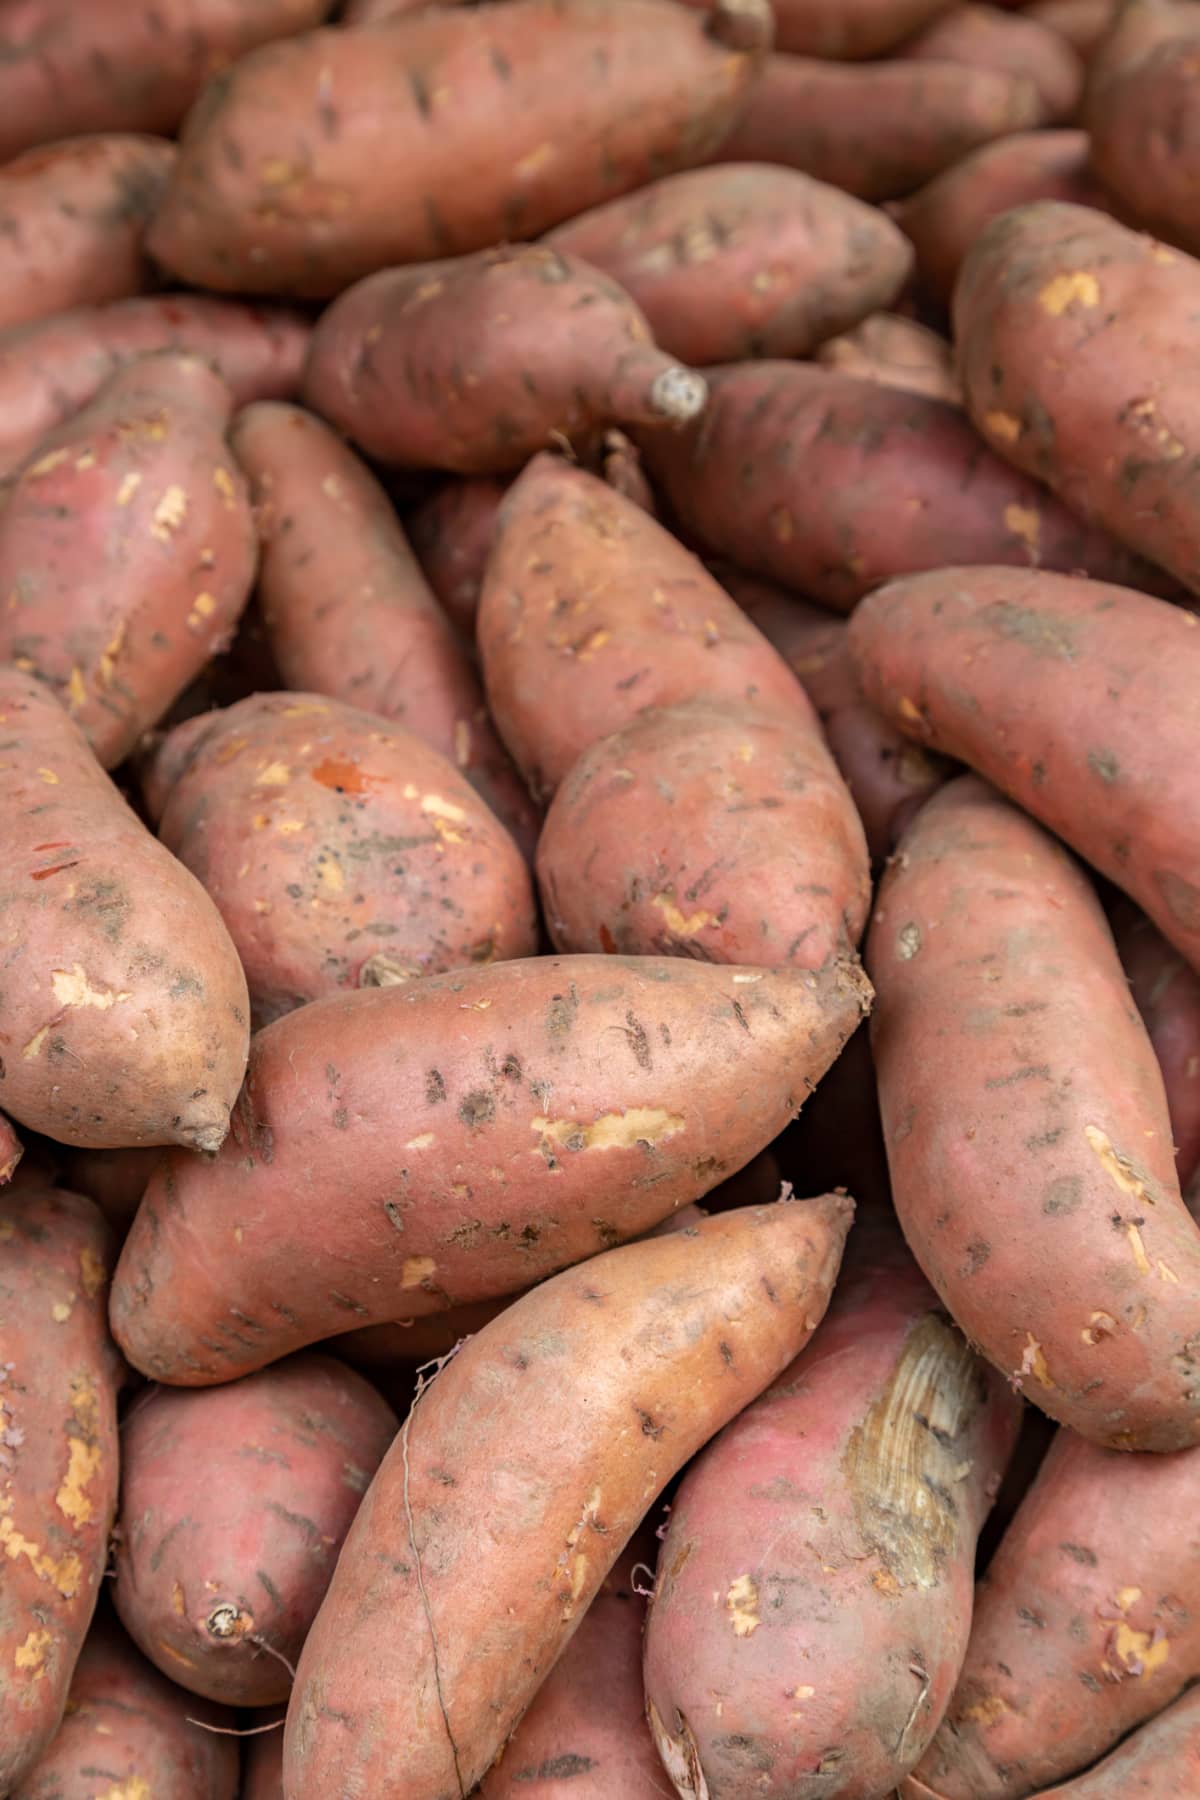 A full frame photograph of sweet potatoes on a market stall